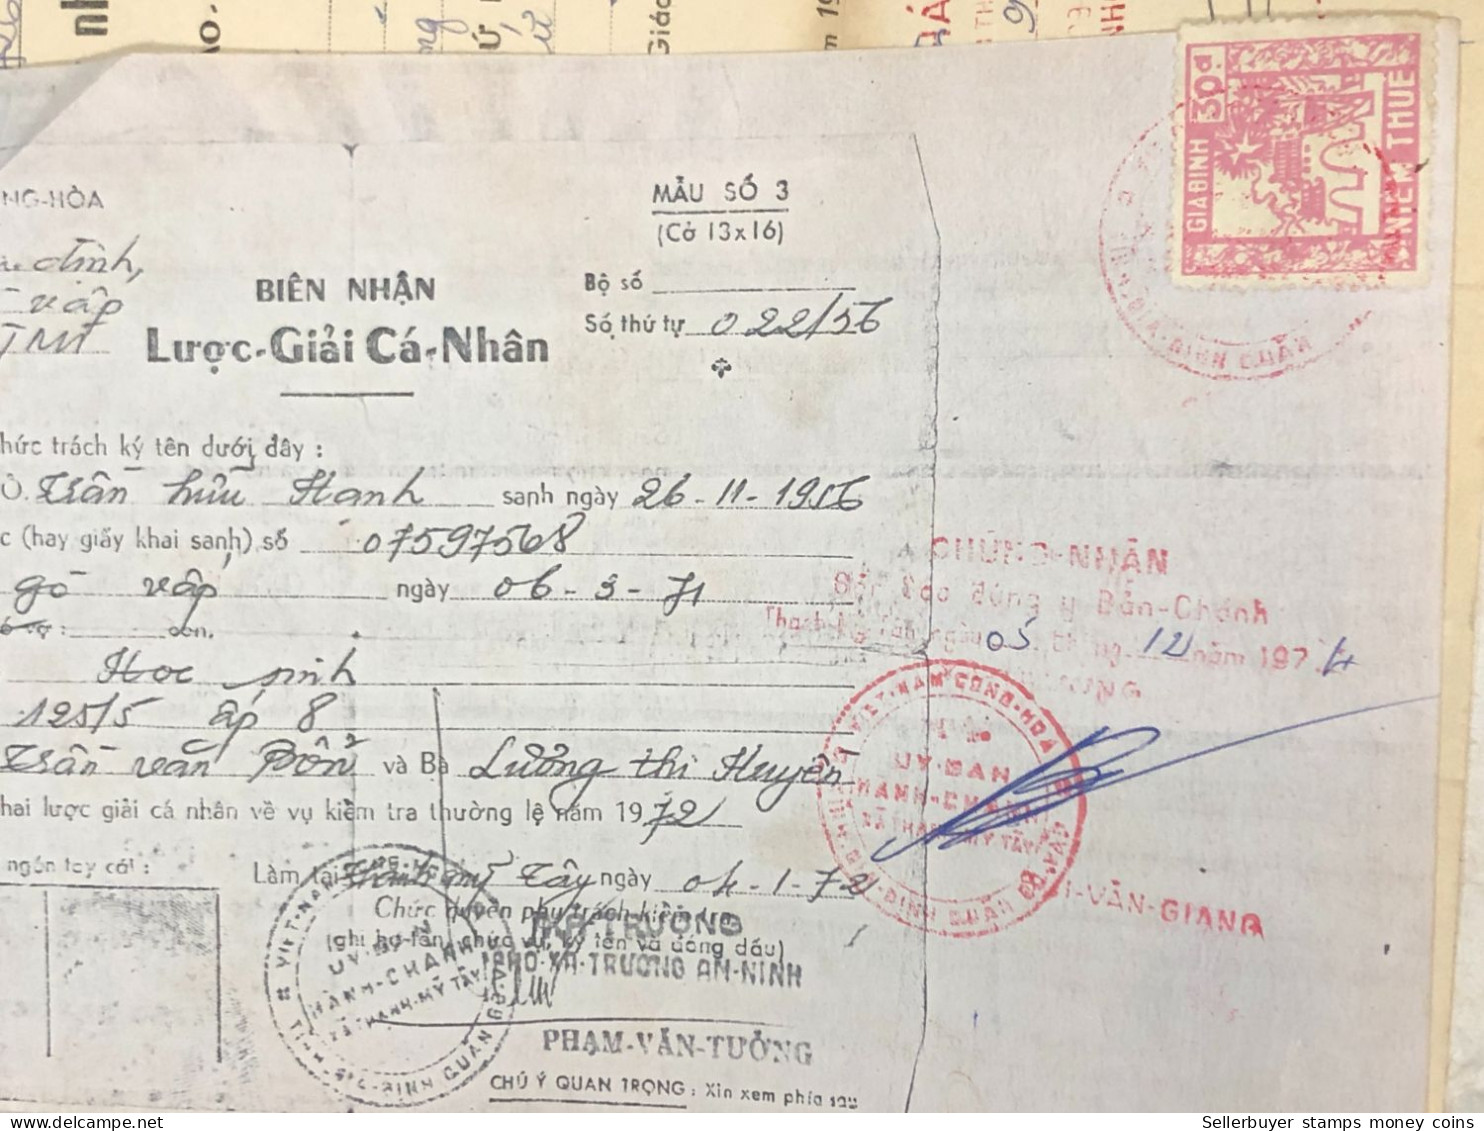 Viet Nam Suoth Old Documents That Have Children Authenticated(30 $ Gia Dinh 1974) PAPER Have Wedge QUALITY:GOOD 1-PCS Ve - Sammlungen